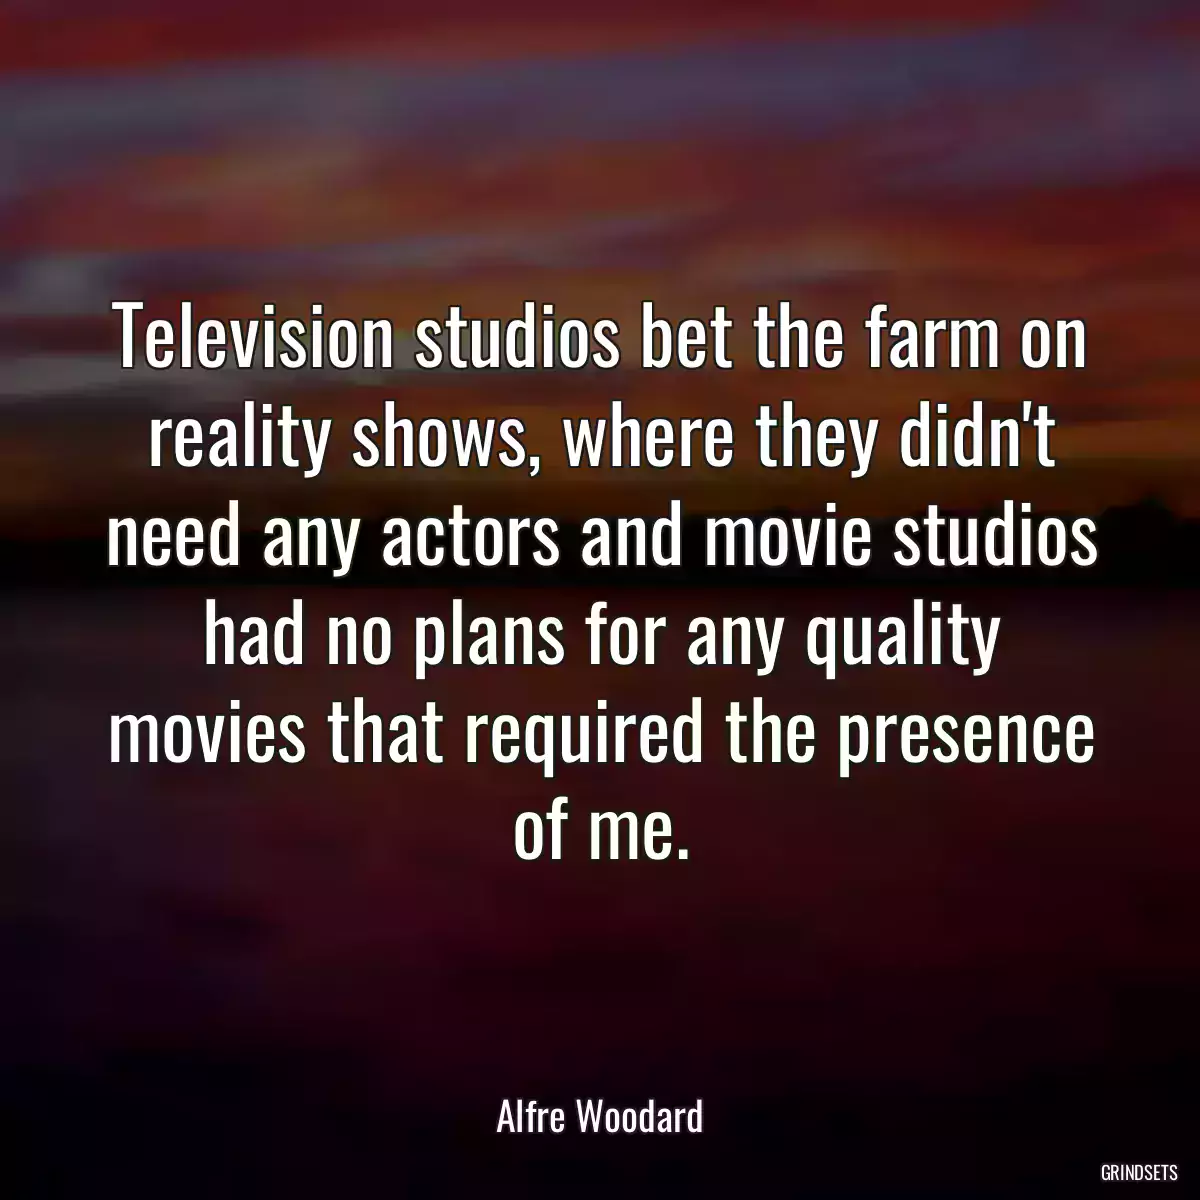 Television studios bet the farm on reality shows, where they didn\'t need any actors and movie studios had no plans for any quality movies that required the presence of me.